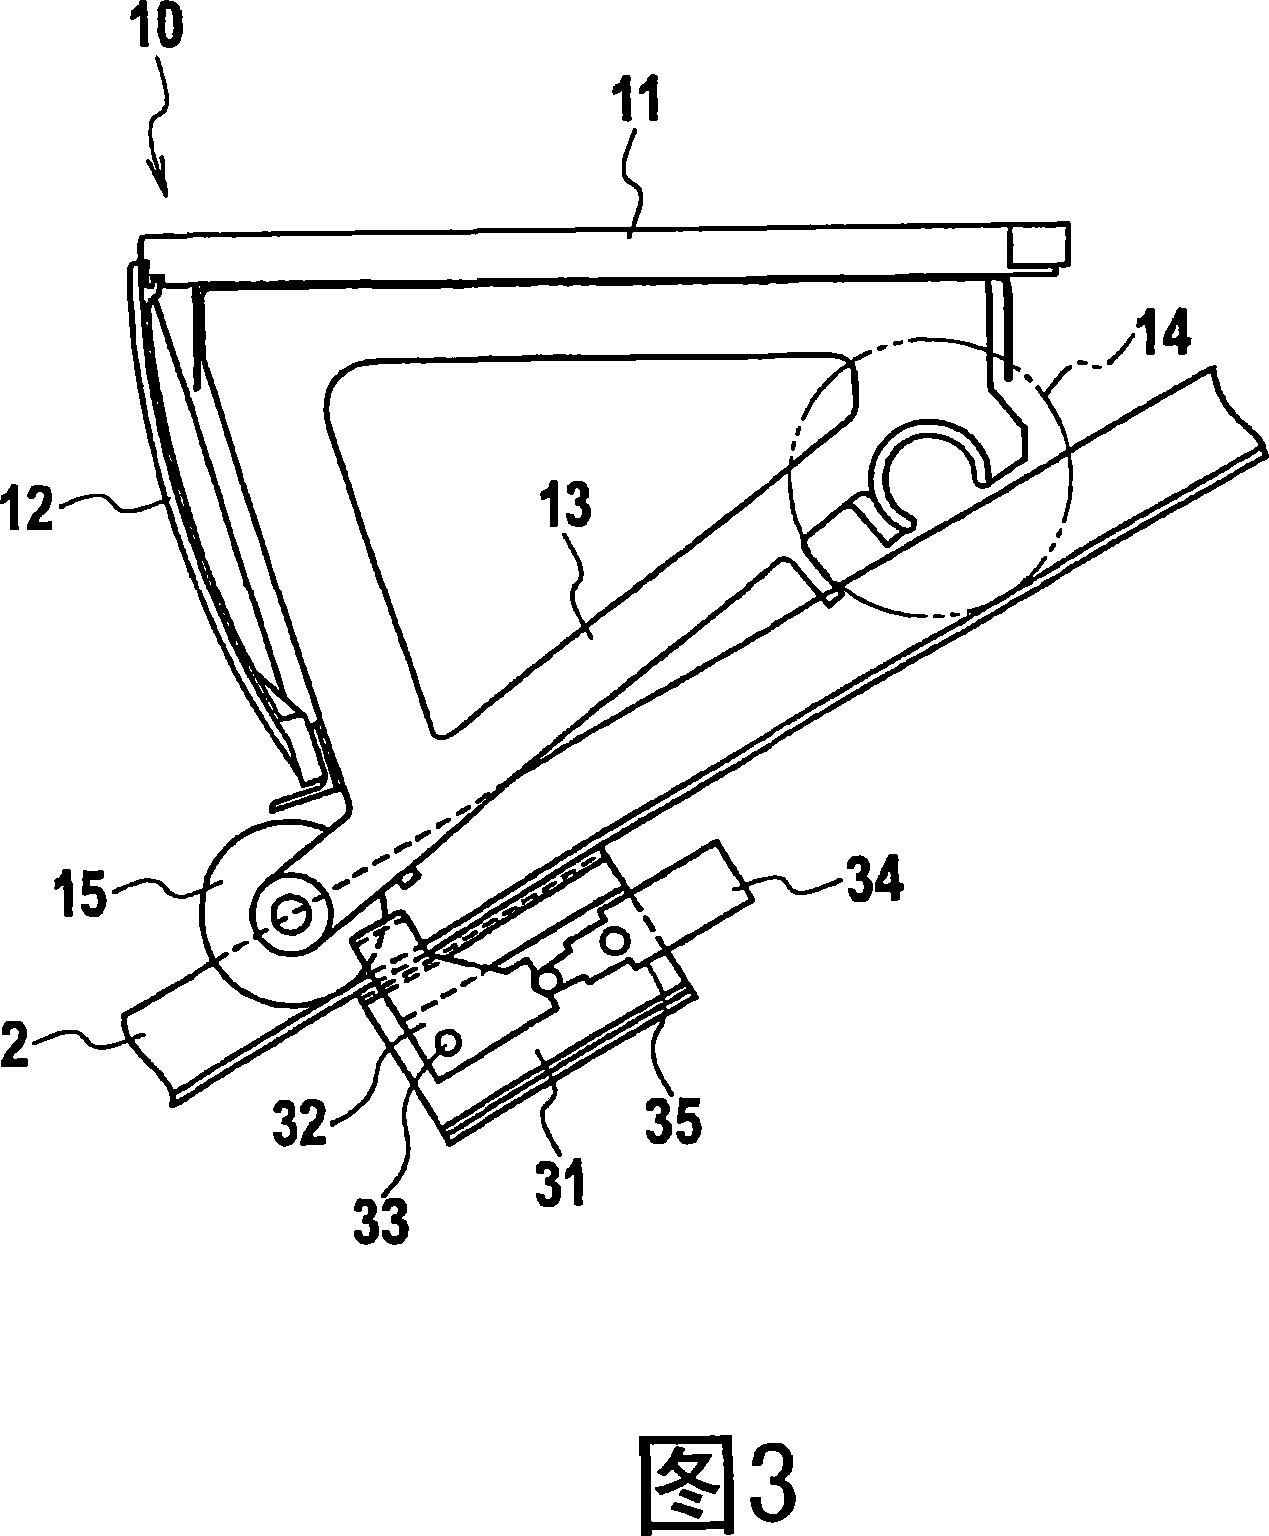 Abnormality detection device for step and passenger conveyor